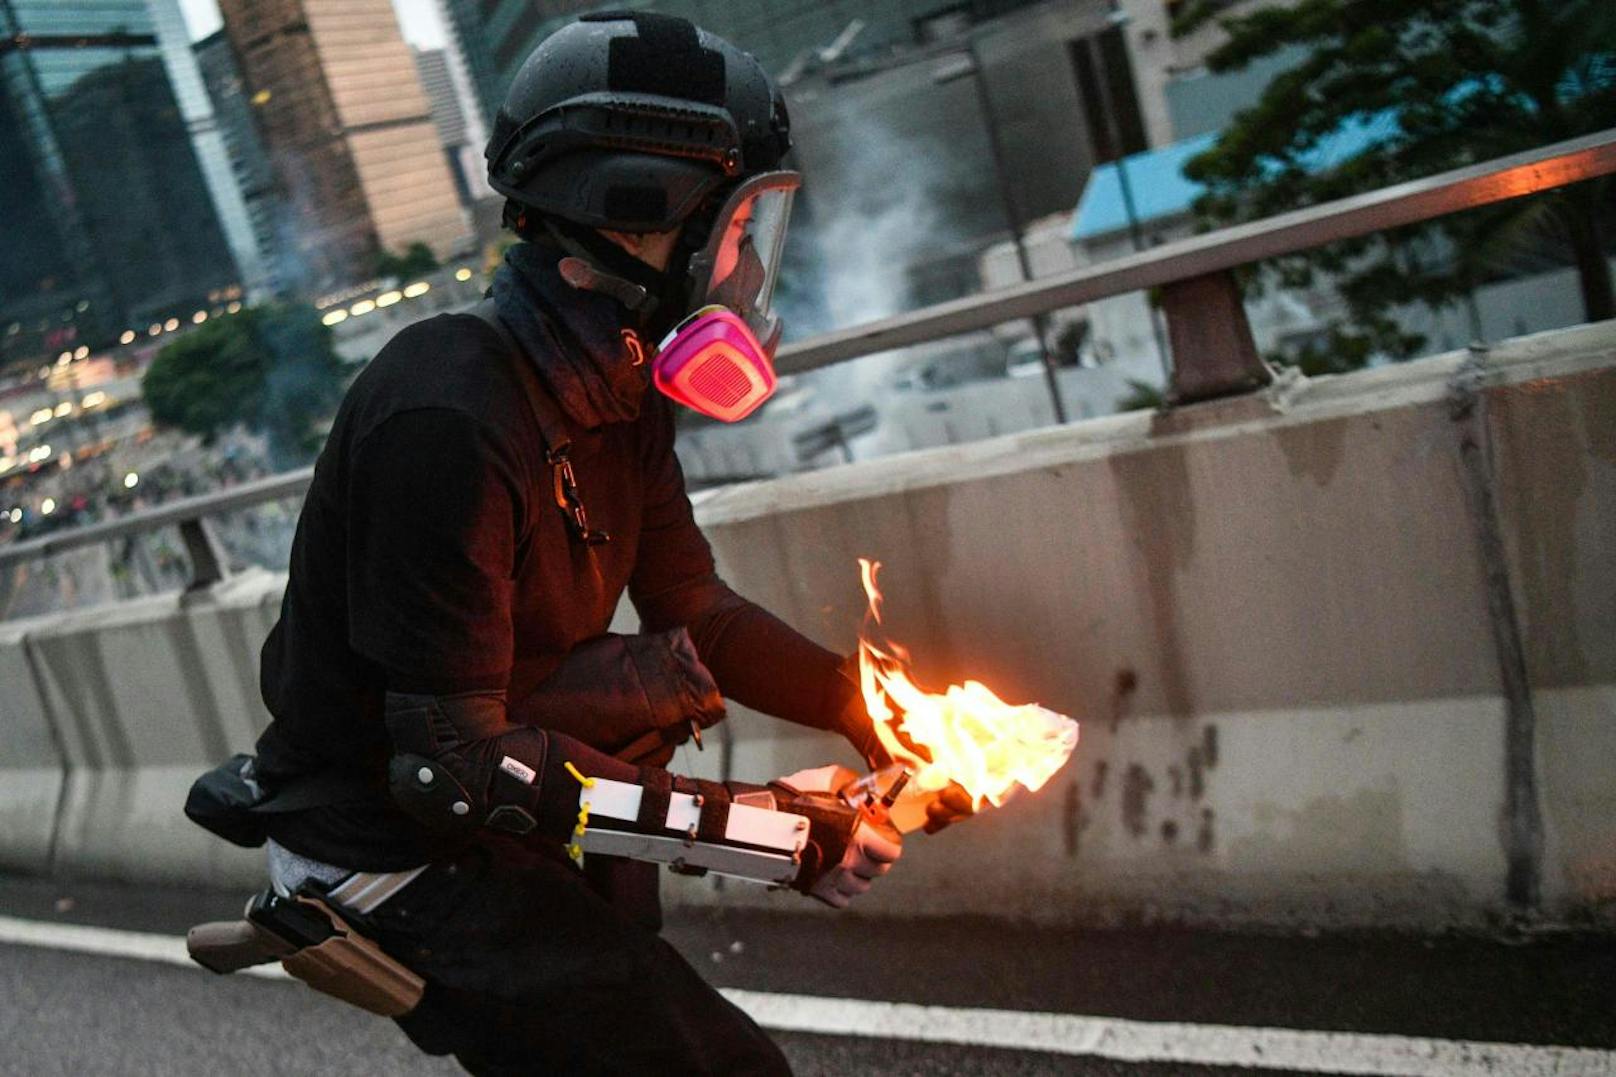 Download von www.picturedesk.com am 31.08.2019 (15:32). 
A protester throws a molotov cocktail towards police outside the government headquarters in Hong Kong on August 31, 2019. - Chaos engulfed Hong Kong's financial heart on August 31 as police fired tear gas and water cannon at petrol bomb-throwing protesters, who defied a ban on rallying -- and mounting threats from China -- to take to the streets for a 13th straight weekend. (Photo by Anthony WALLACE / AFP) - 20190831_PD2685 - Rechteinfo: Nur für redaktionelle Nutzung! - Editorial Use Only! Werbliche Nutzung nur nach Freigabe!